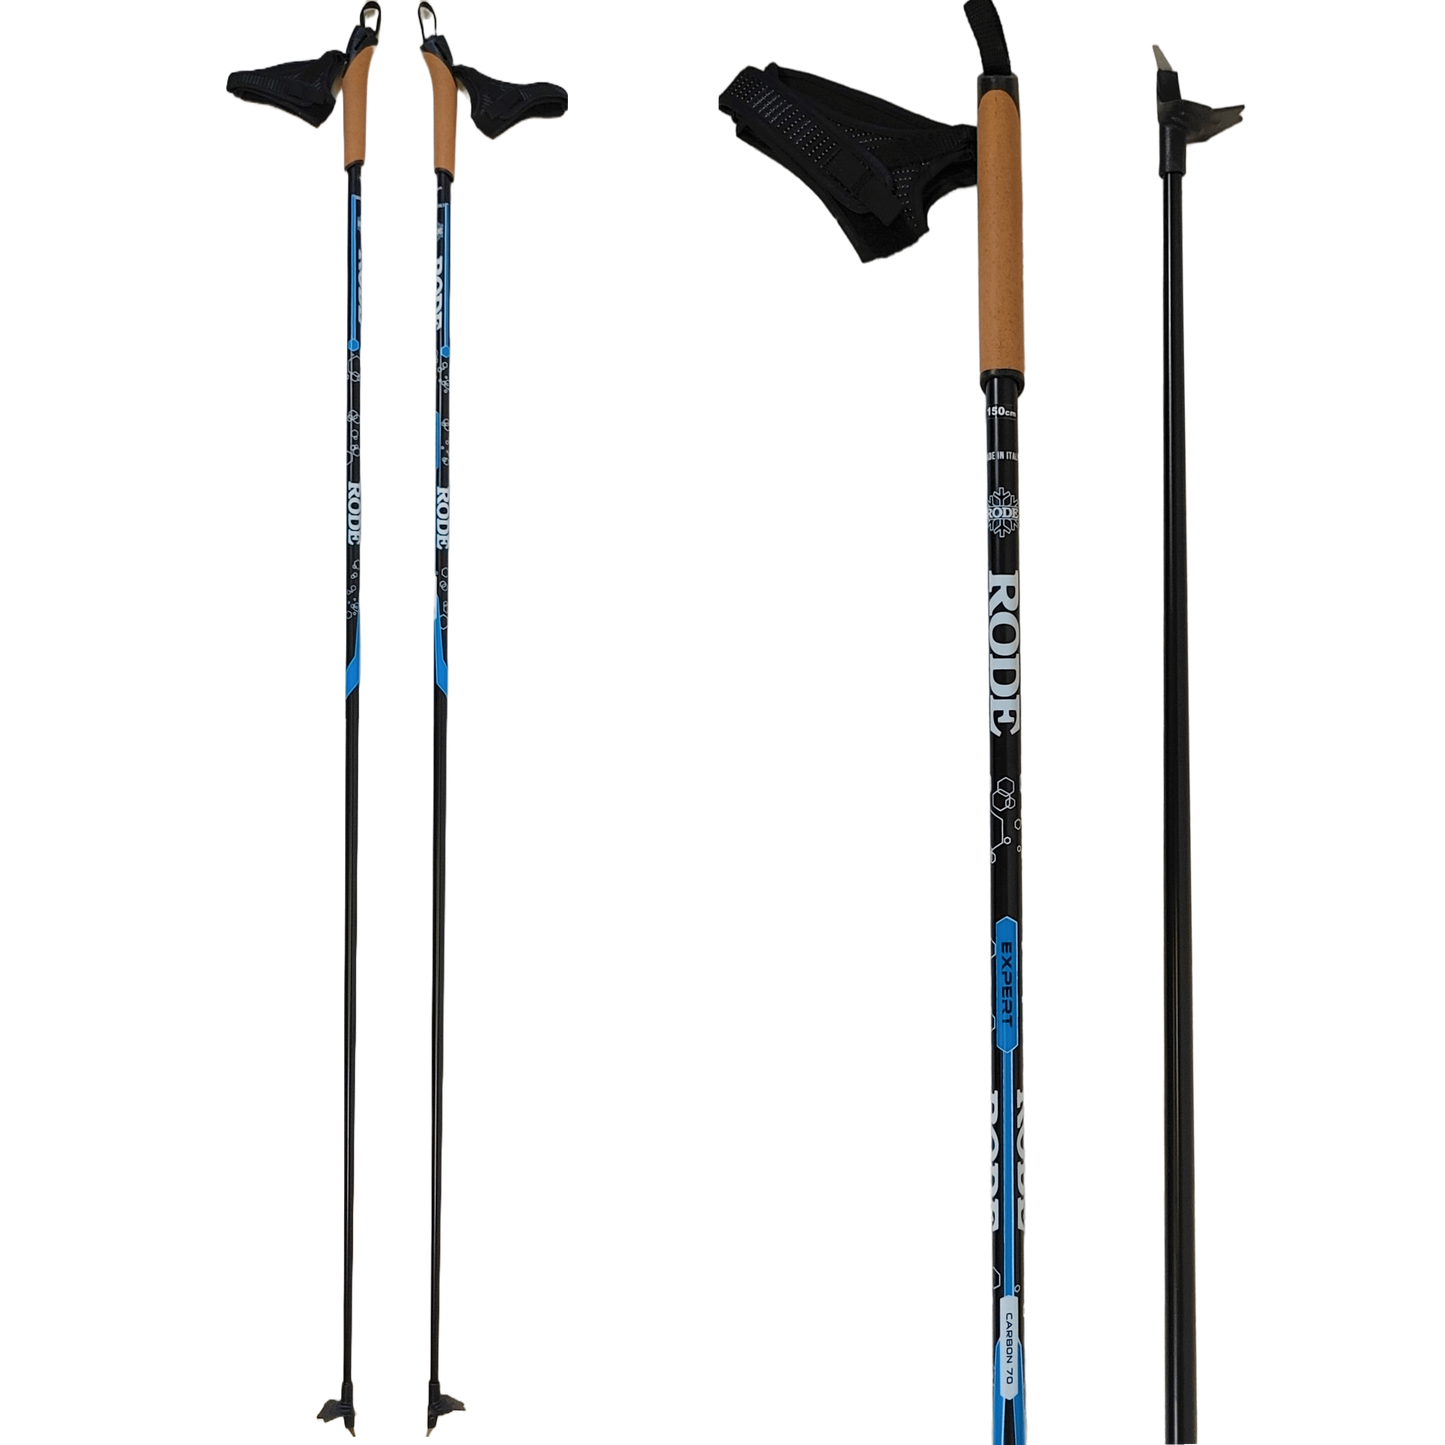 A product picture of the Rode Expert Poles